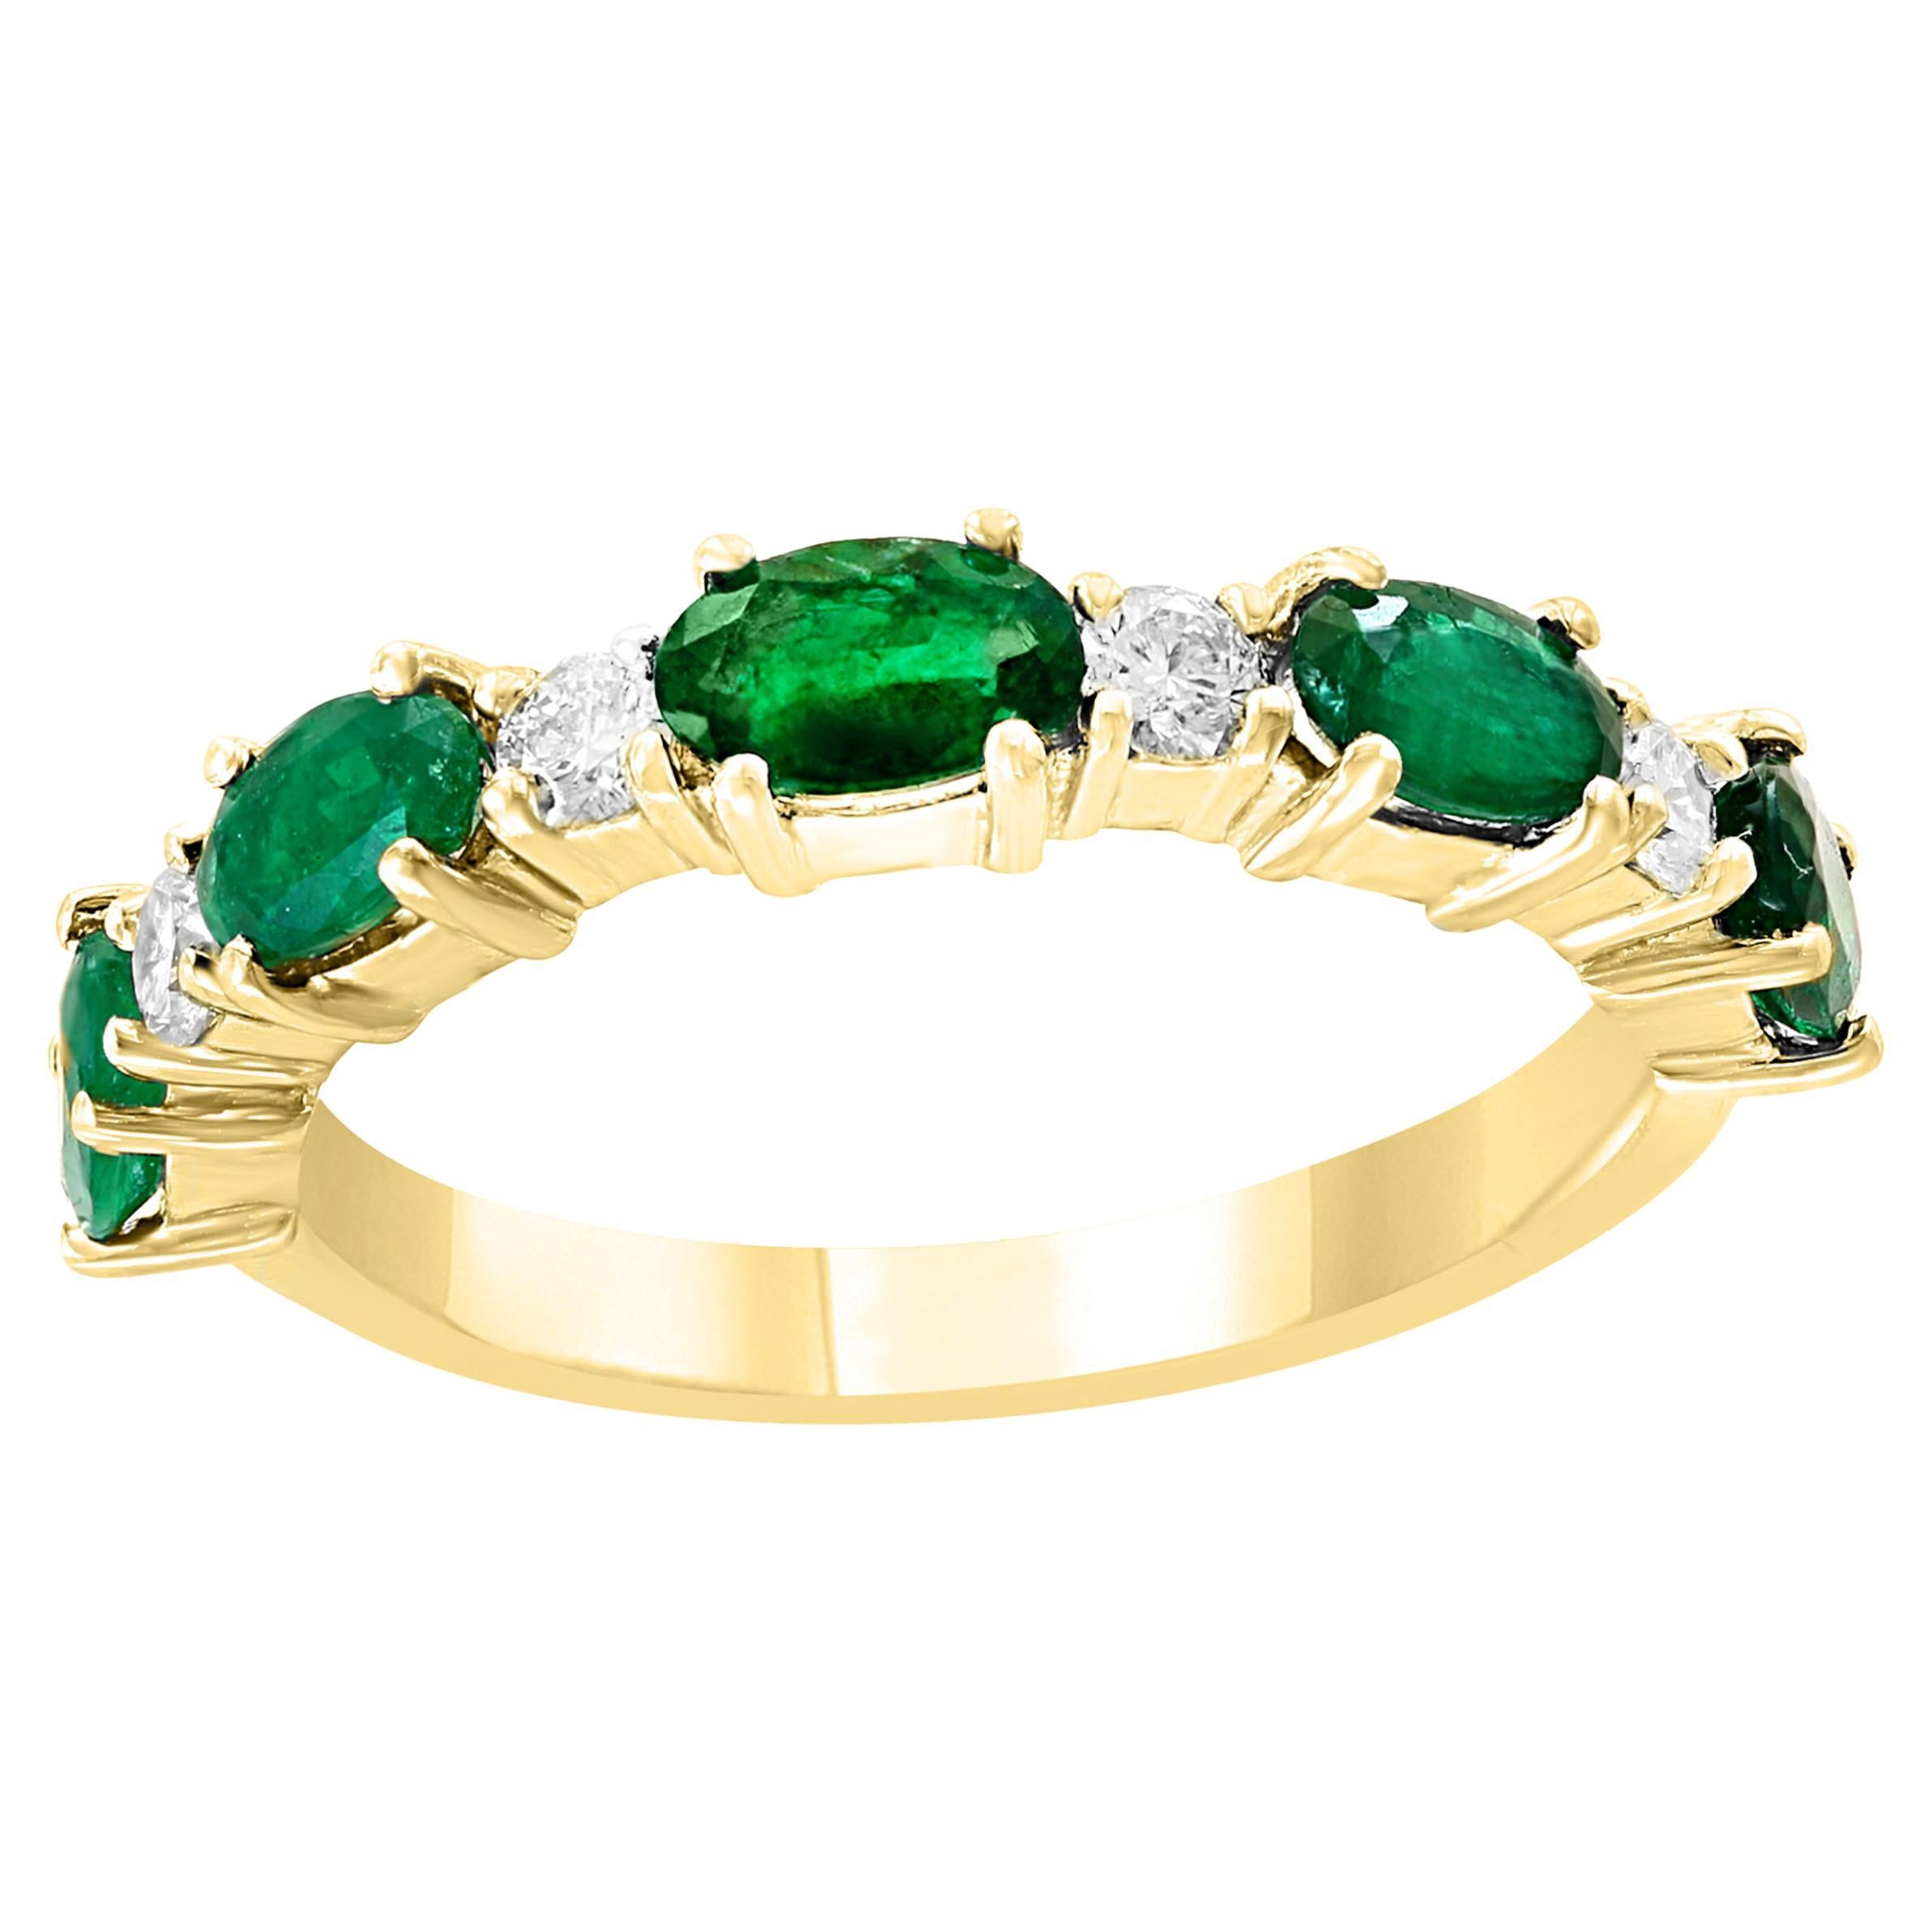 0.94 Carat Oval Cut Alternating Emerald Diamond Wedding Band in 14k Yellow Gold For Sale